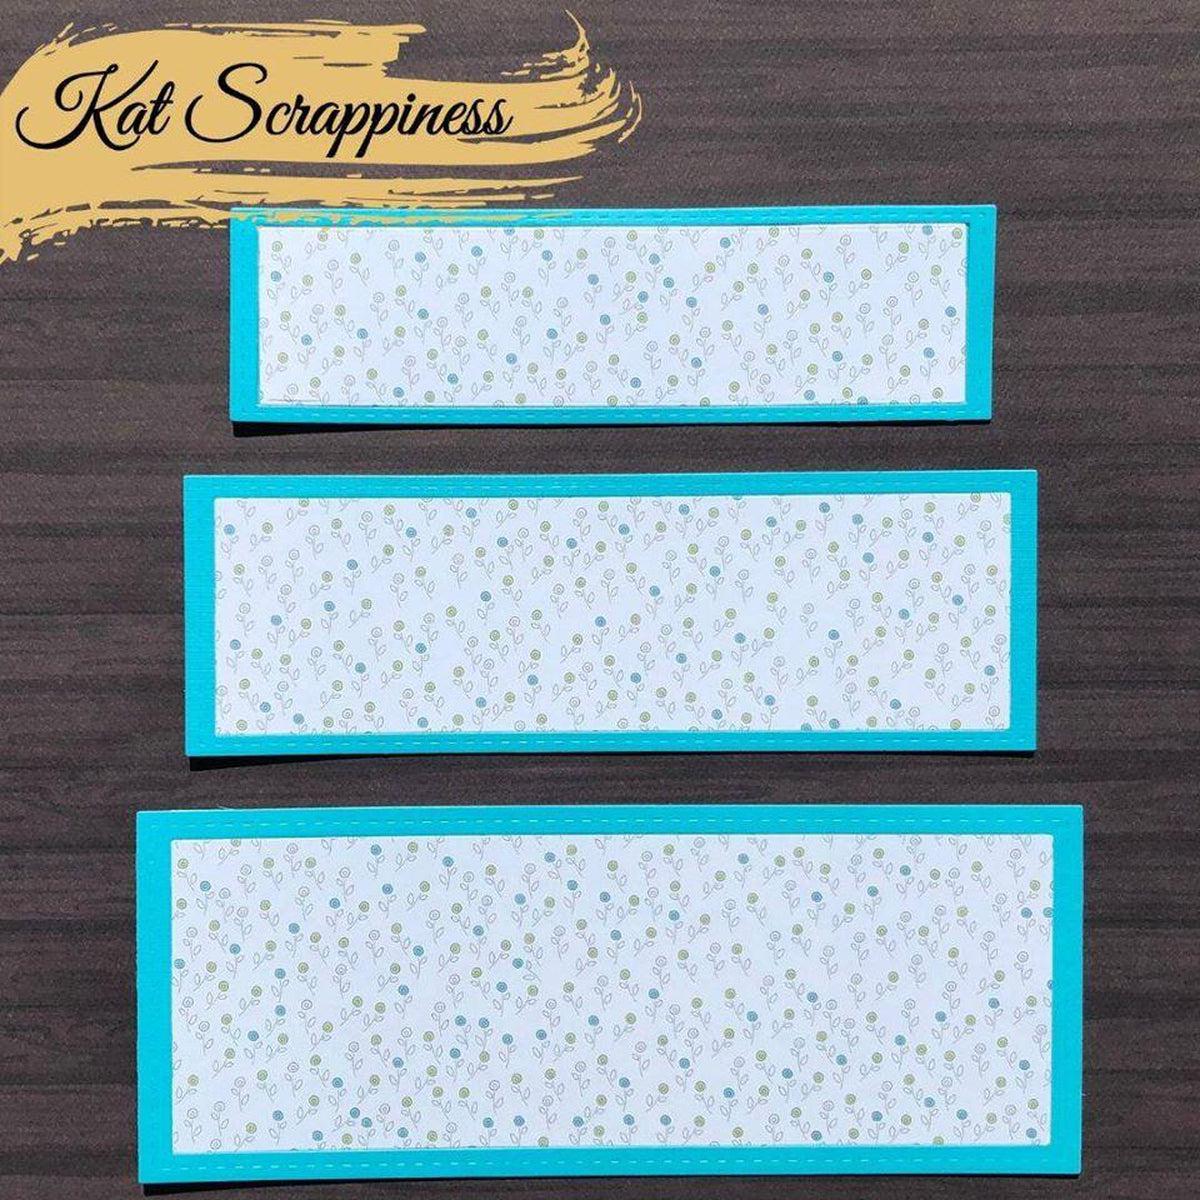 Tri-Frame Slimline Dies by Kat Scrappiness - RESERVE - Kat Scrappiness